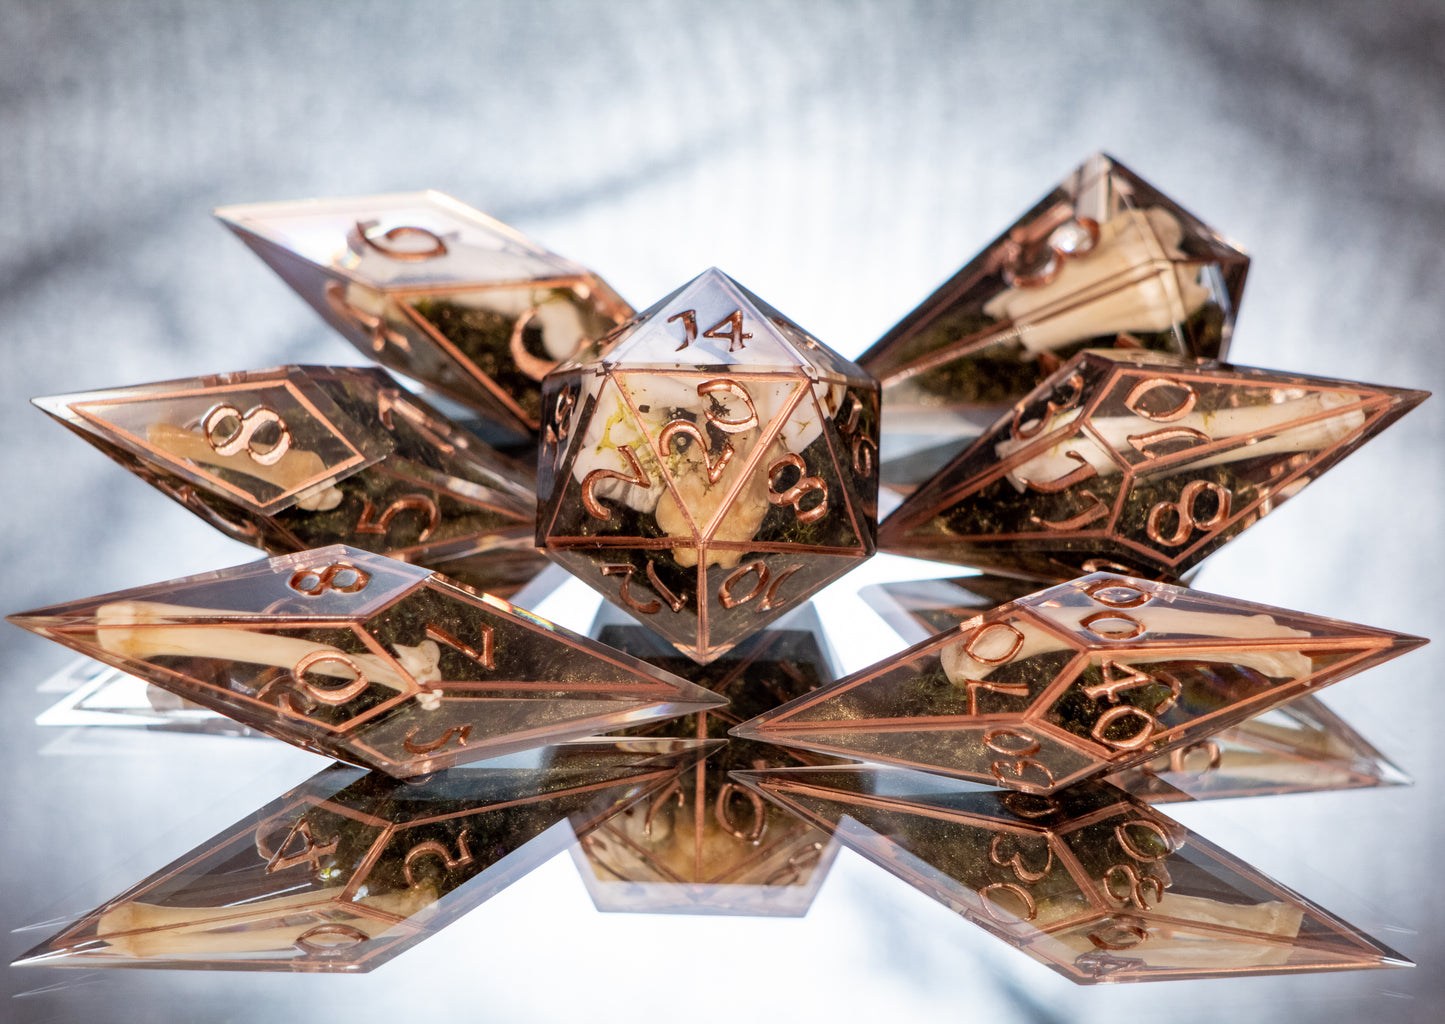 All That Remains- Sharp 7 Piece Handmade Resin Dice